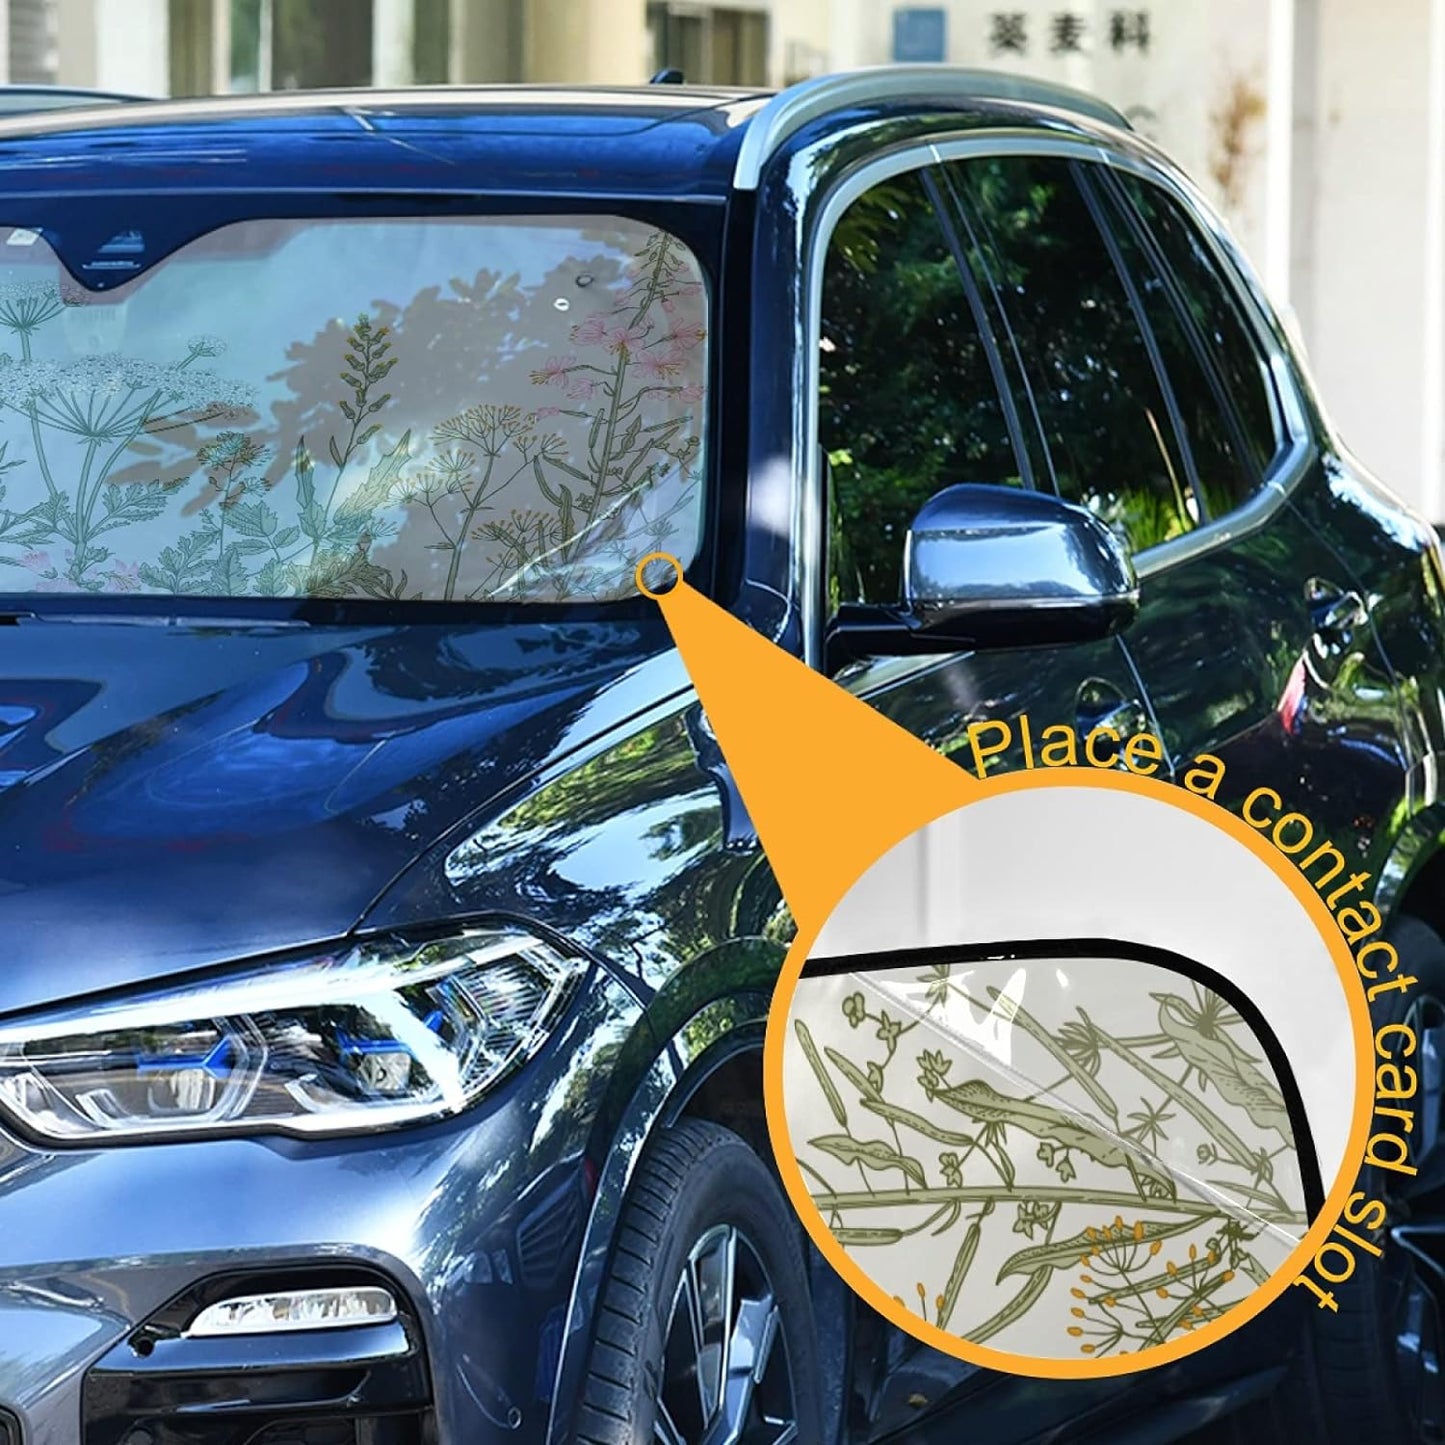 xigua Vintage Colorful Herbs Wild Flowers Floral Car Windshield Sunshade Foldable Front Window Sun Visor Protector for Car,SUV,Truck - Keep Vehicle Cool,55 x 27.6 Inch